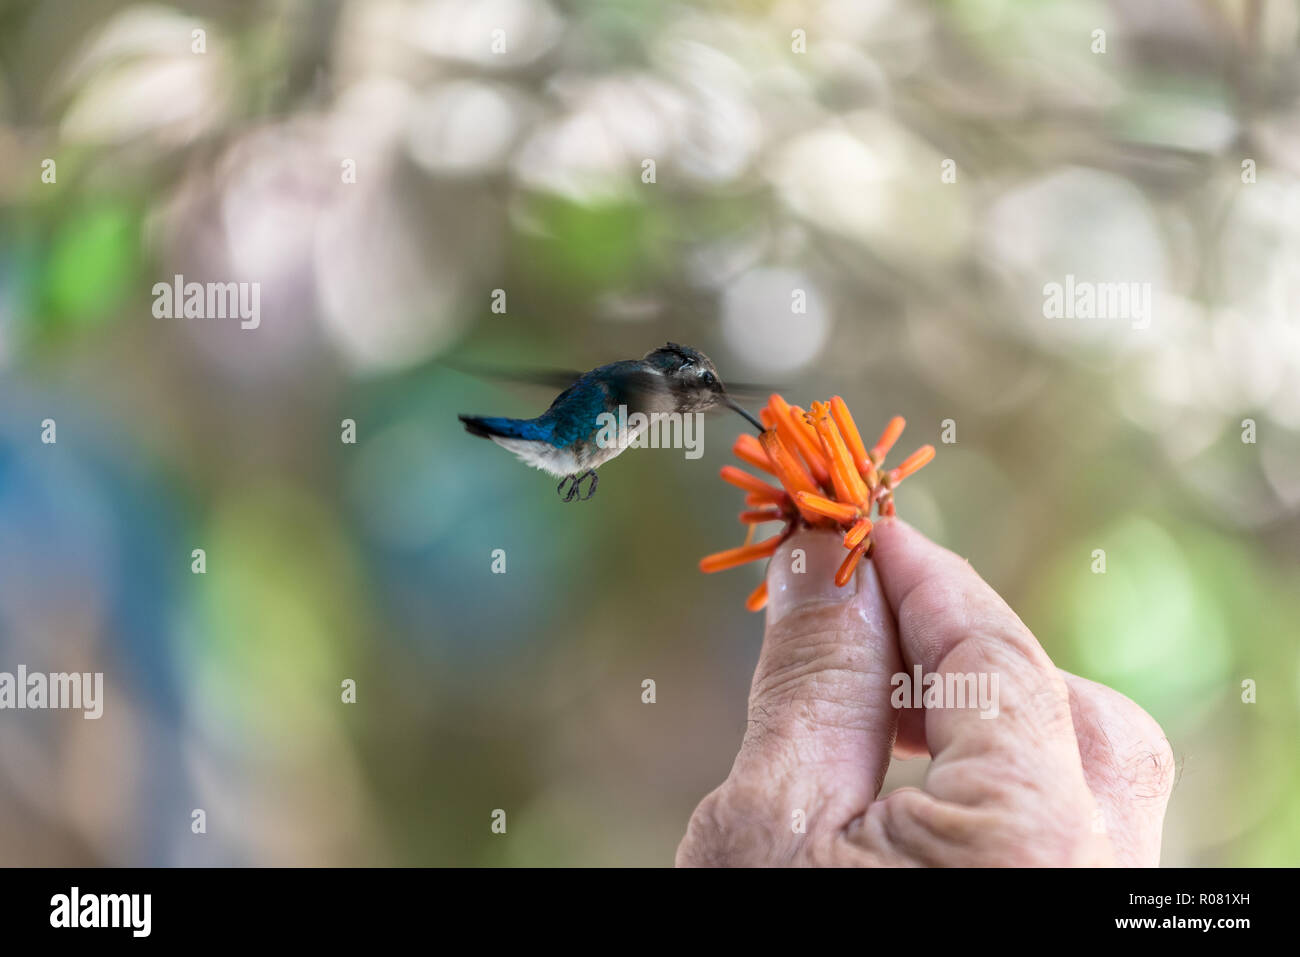 flying hummingbird eating nectar from a flower in Cuba Stock Photo